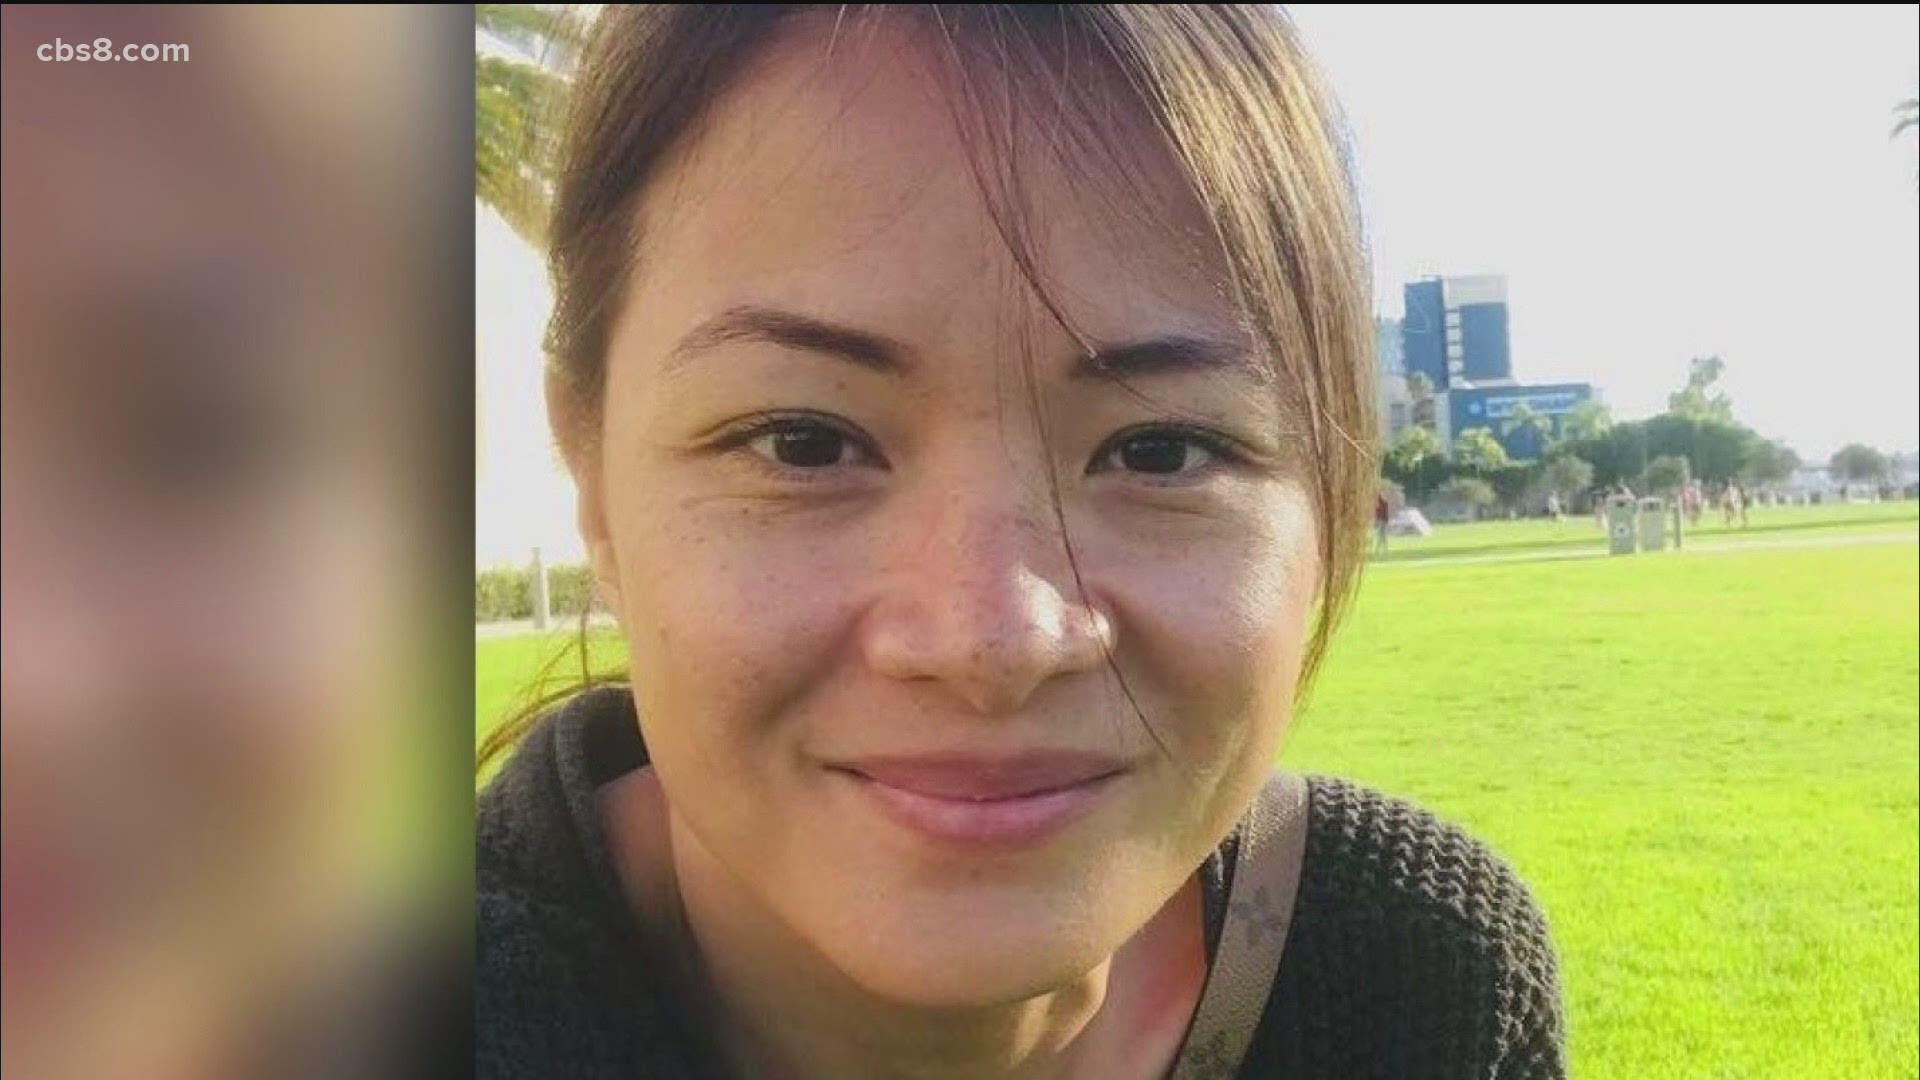 The search for a missing Chula Vista mother will continue into Presidents Day weekend.